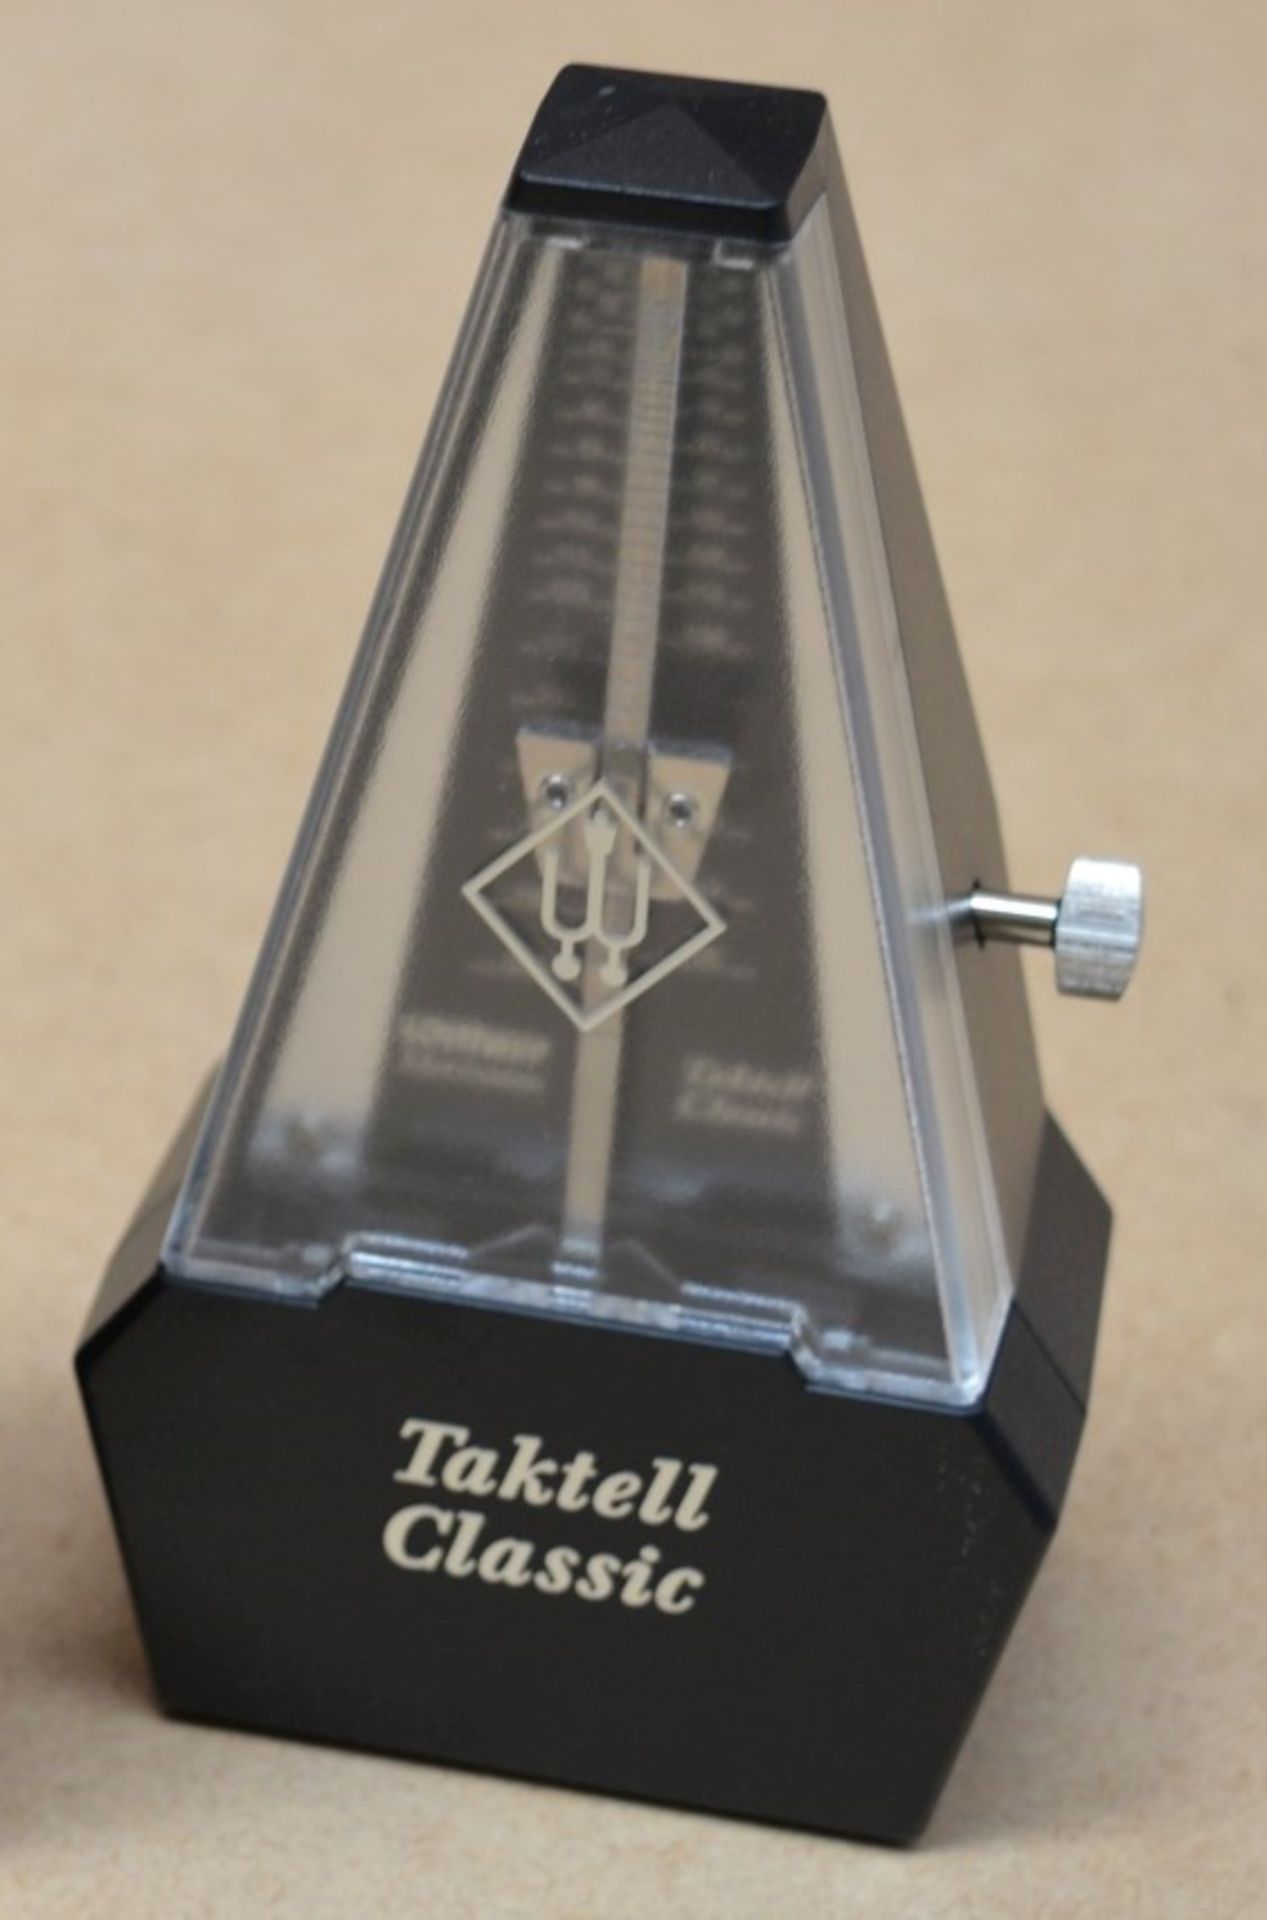 1 x Wittner Taktell Classic Black & Gold Metronome - CL020 - Ref Mus039 - Location: Altrincham - Image 3 of 3